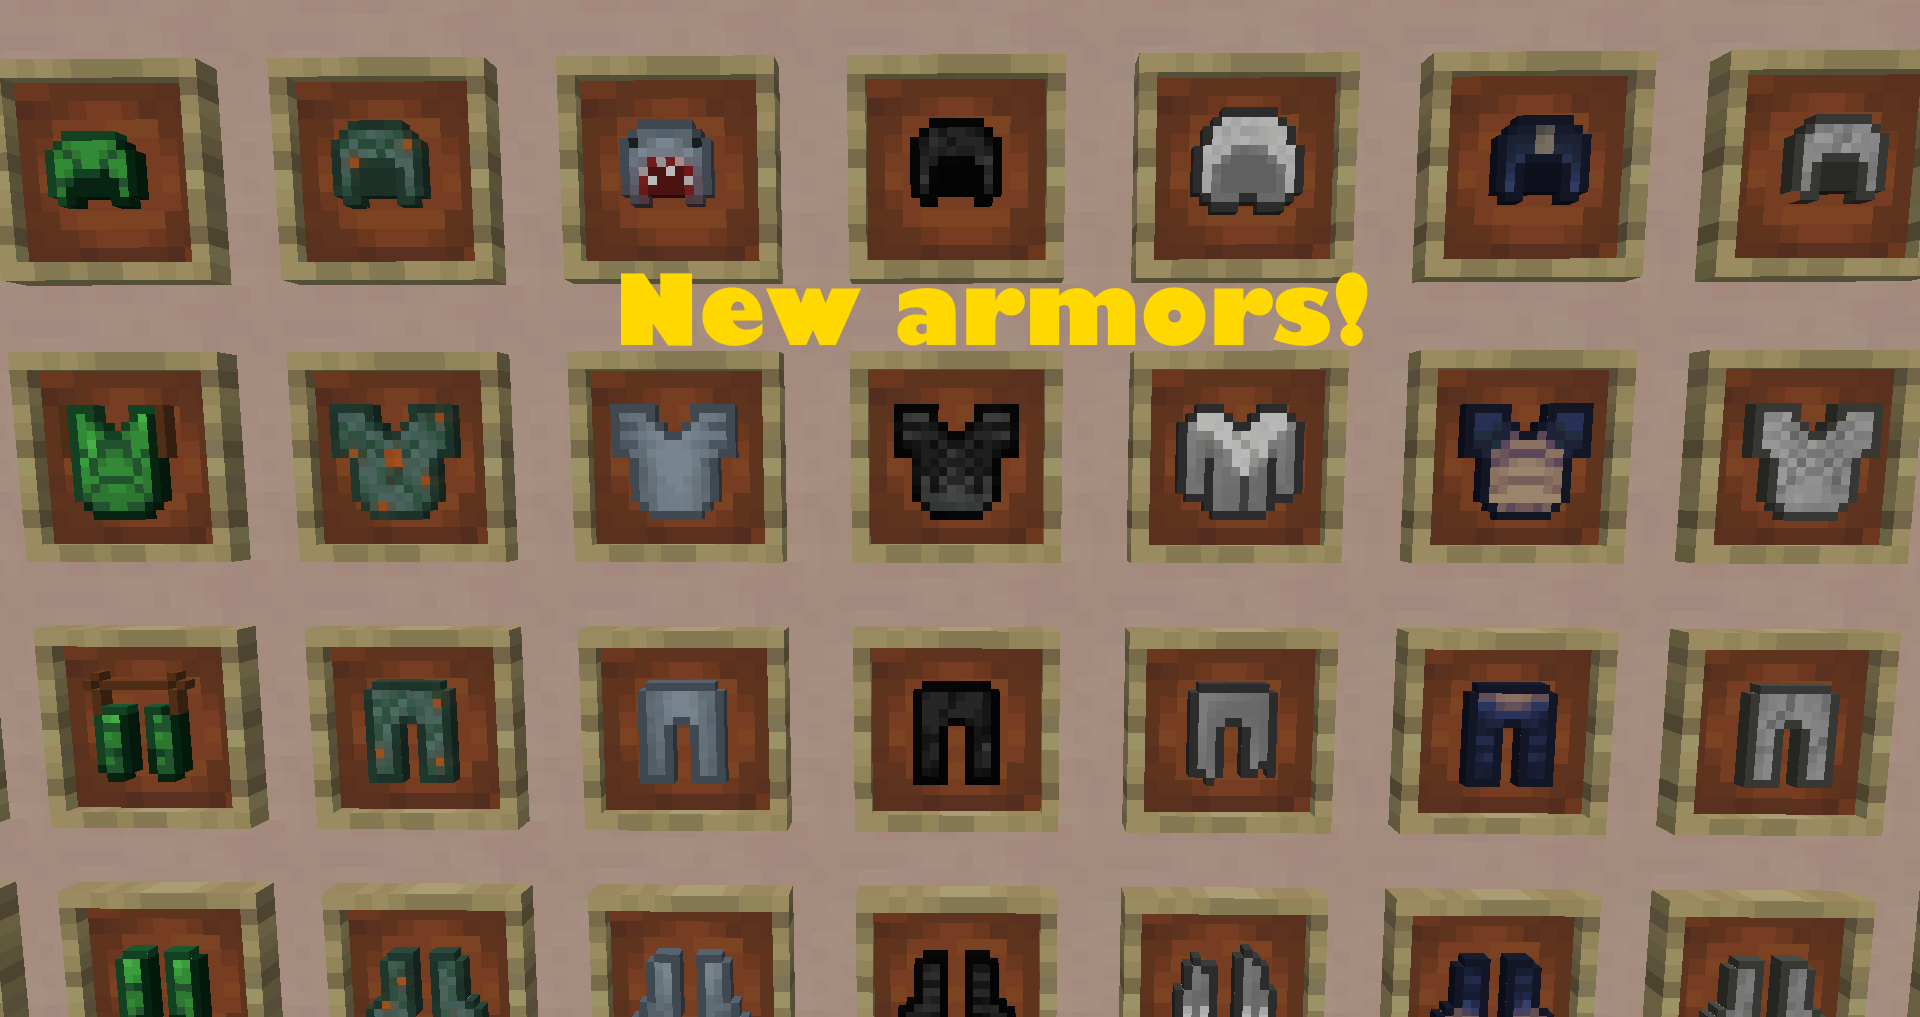 New armors to hunt for!